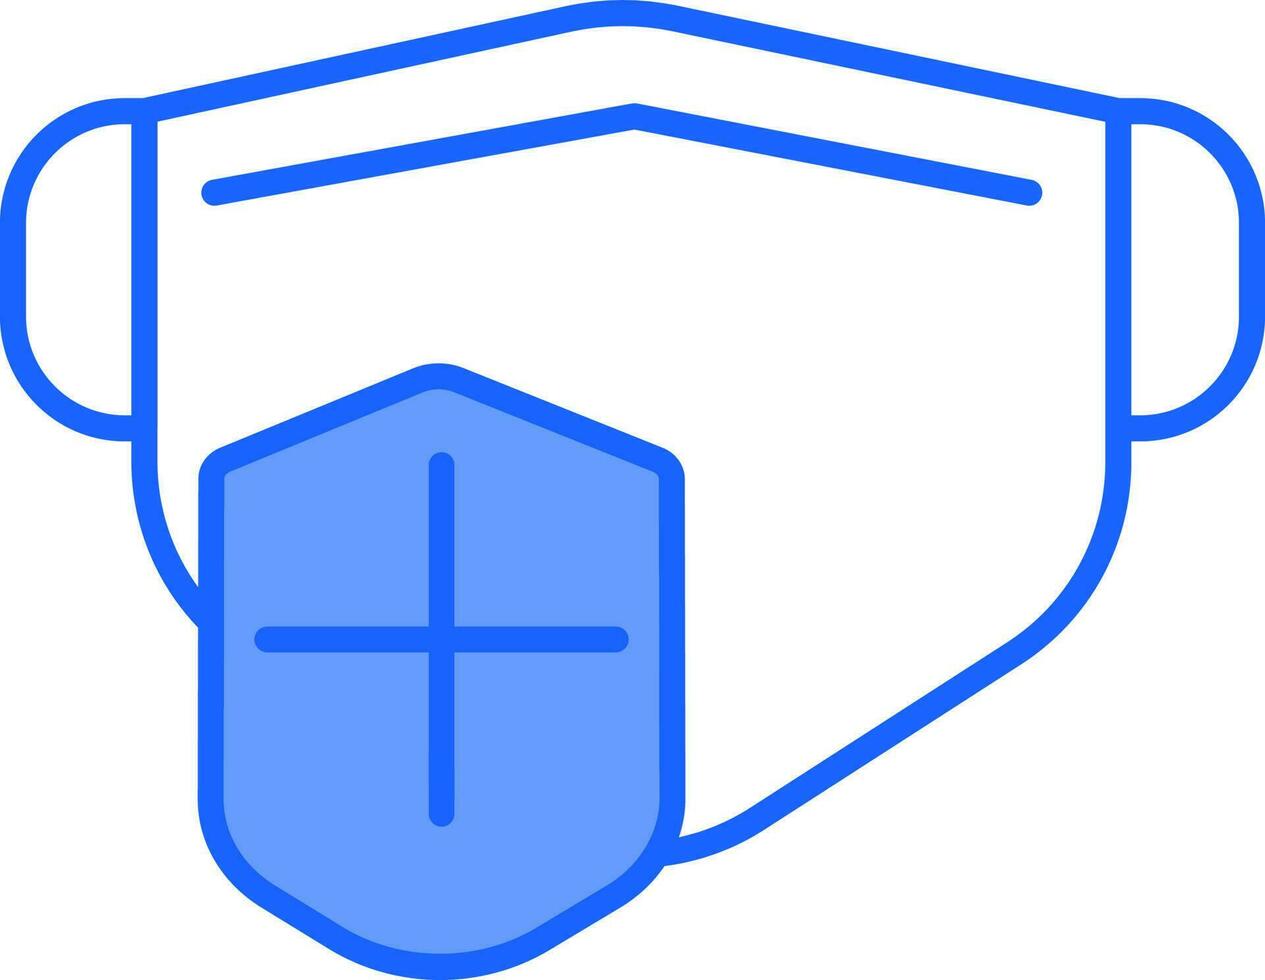 Mask With Medical Shield Icon In Blue And White Color. vector